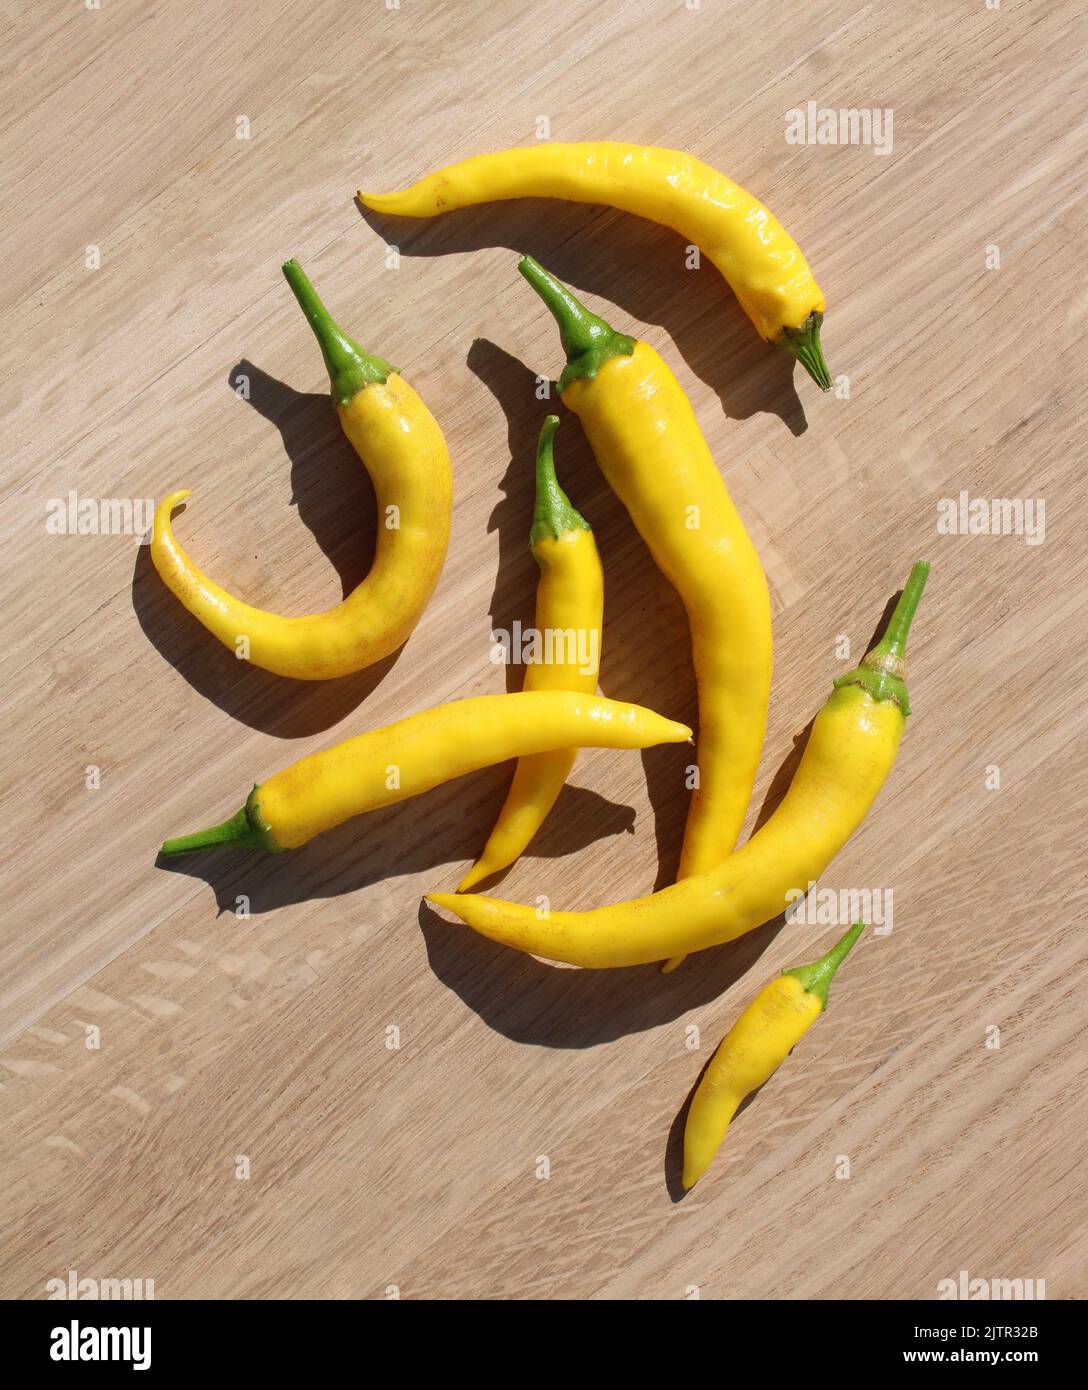 A Pile of Bright Yellow Cayenne Peppers on a Light Wood Background Stock Photo